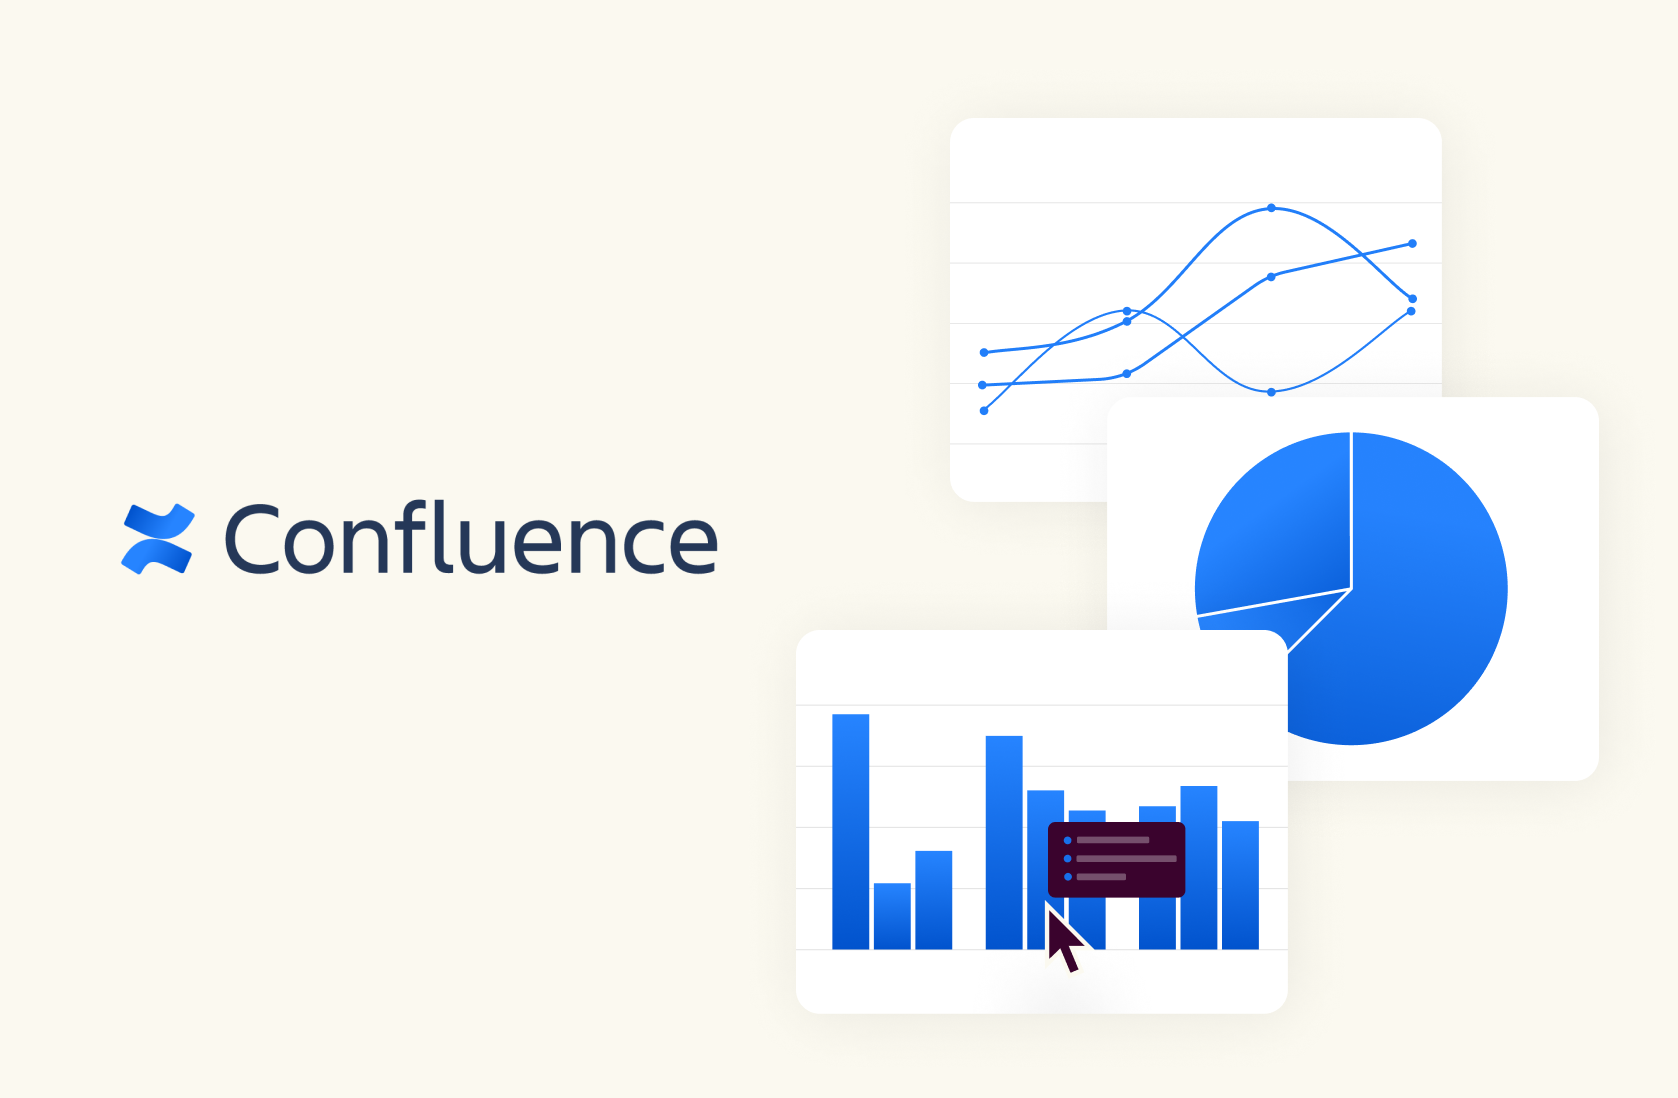 Confluence charts